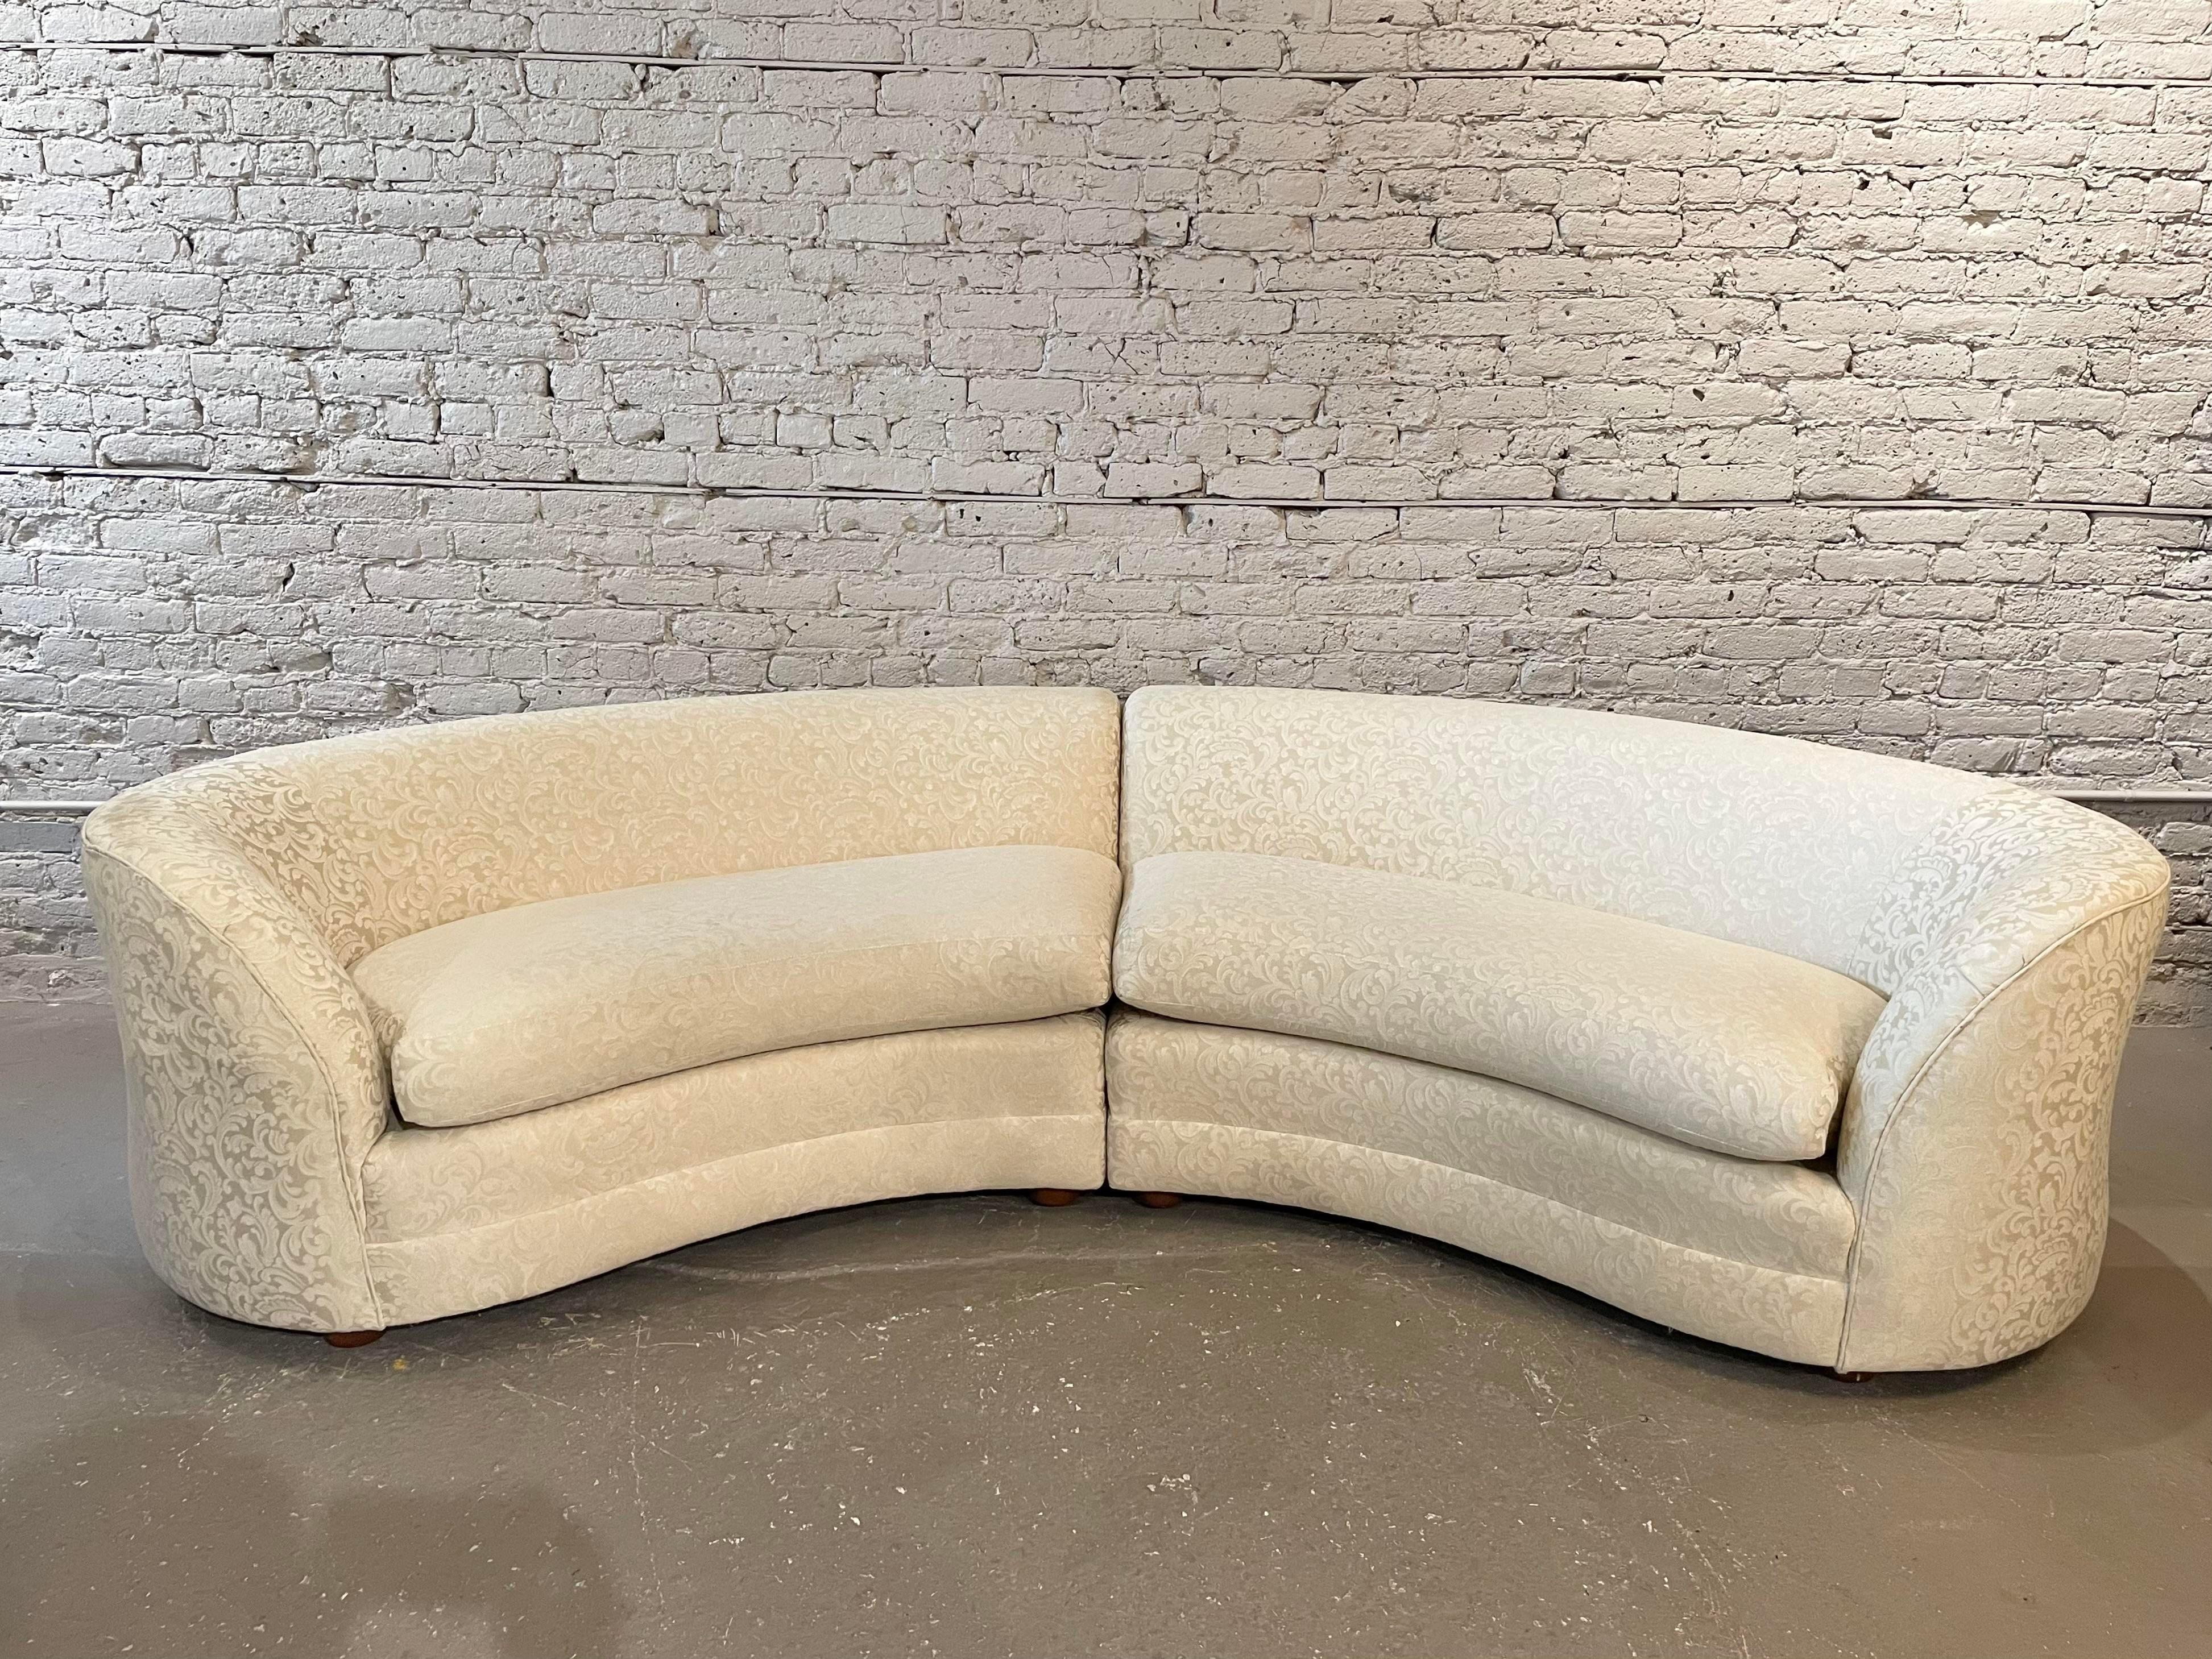 Beautiful and comfortable curved sofas custom made in Italy. Please get in touch if you would like to purchase just one.
The fabric is in good/excellent condition and can be used as is.
The seat depth is 22”. The total depth, including the curve